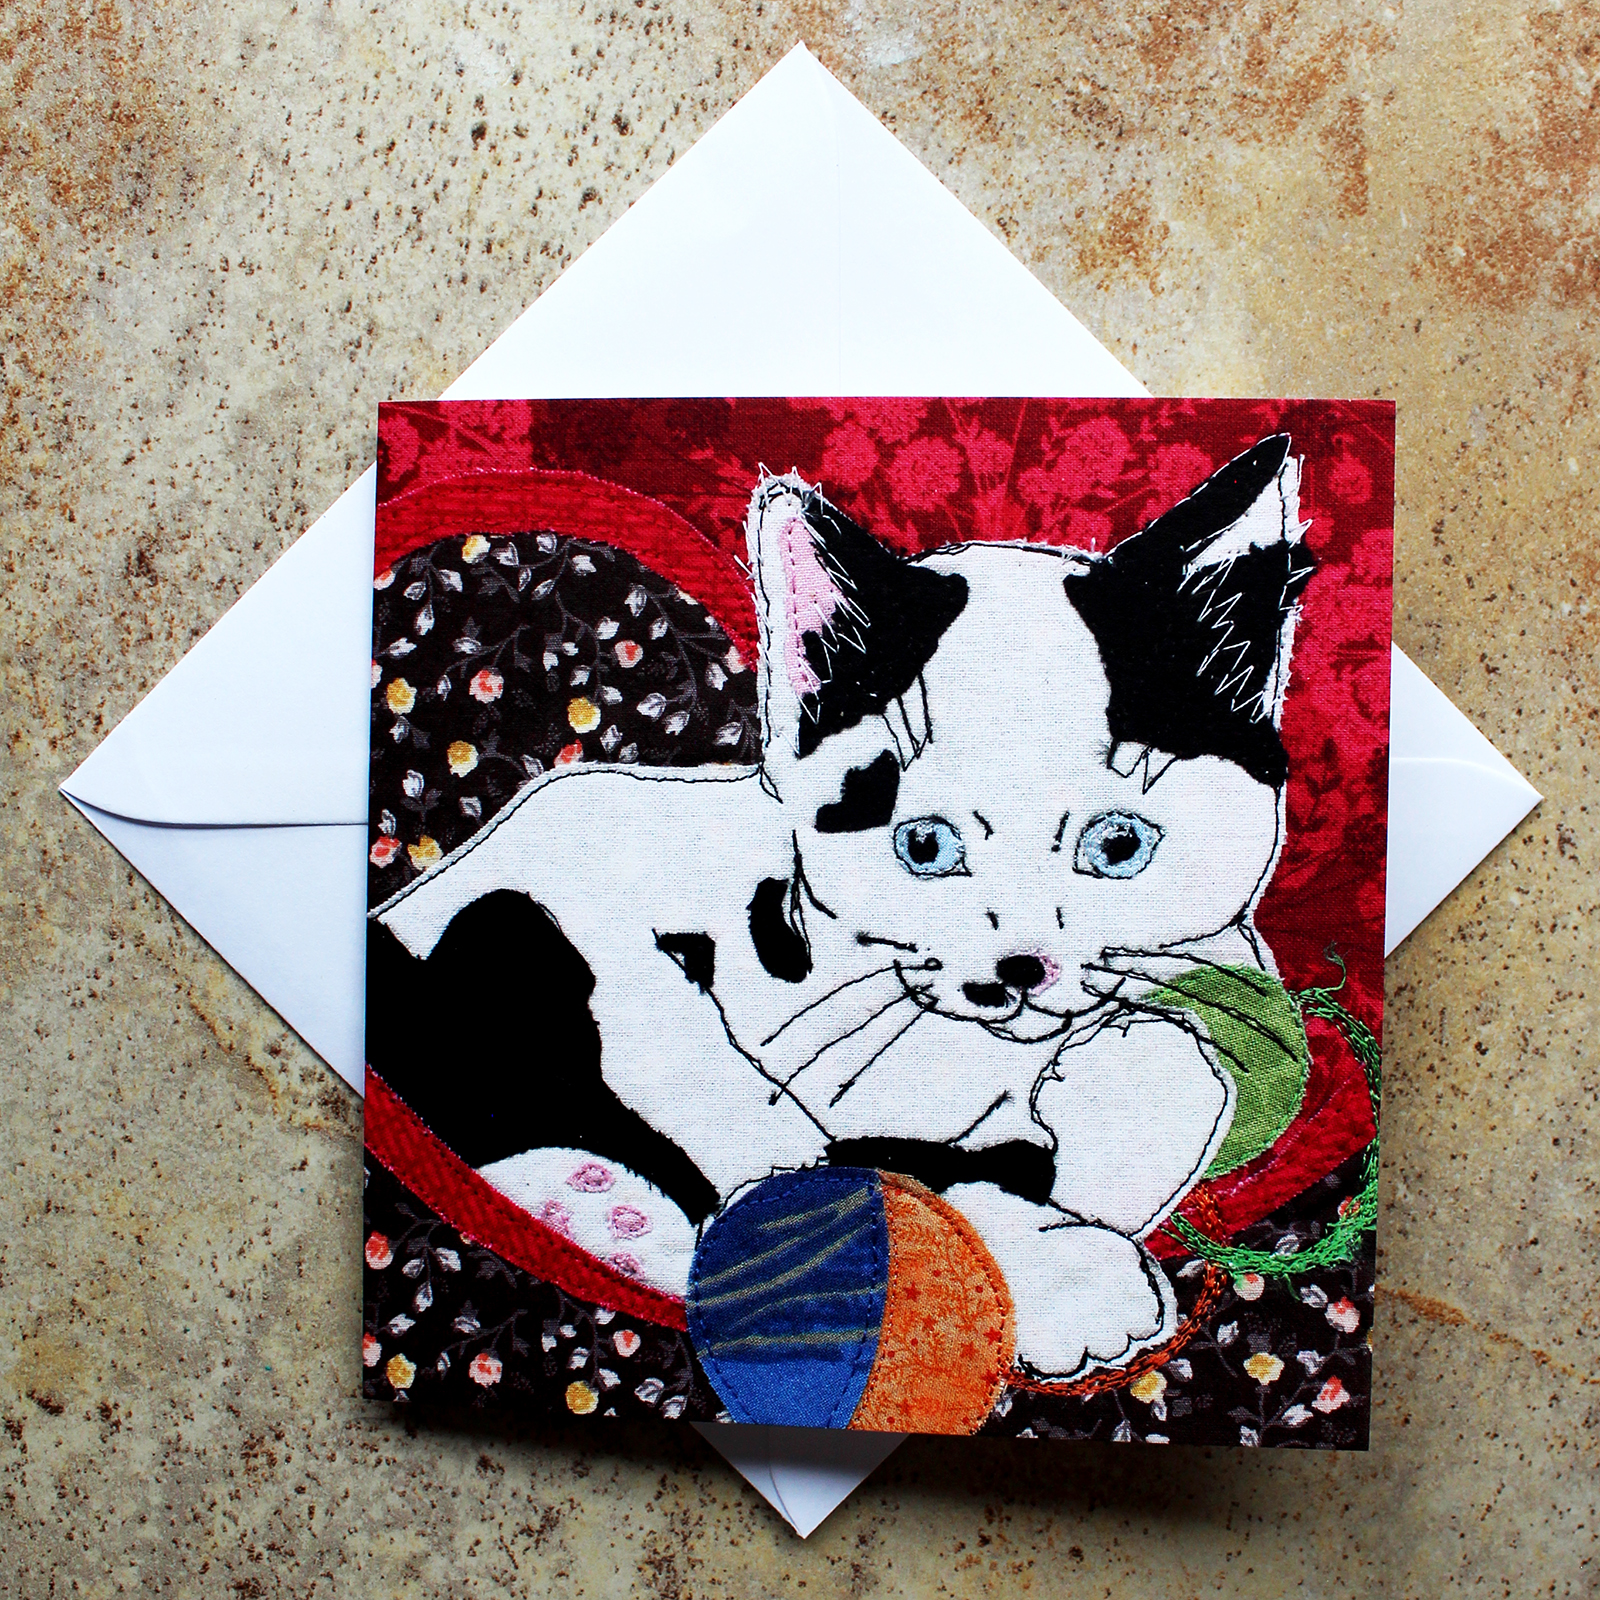 For Rory by Katerina Hasek. Greeting card featuring and applique image of small kitten.